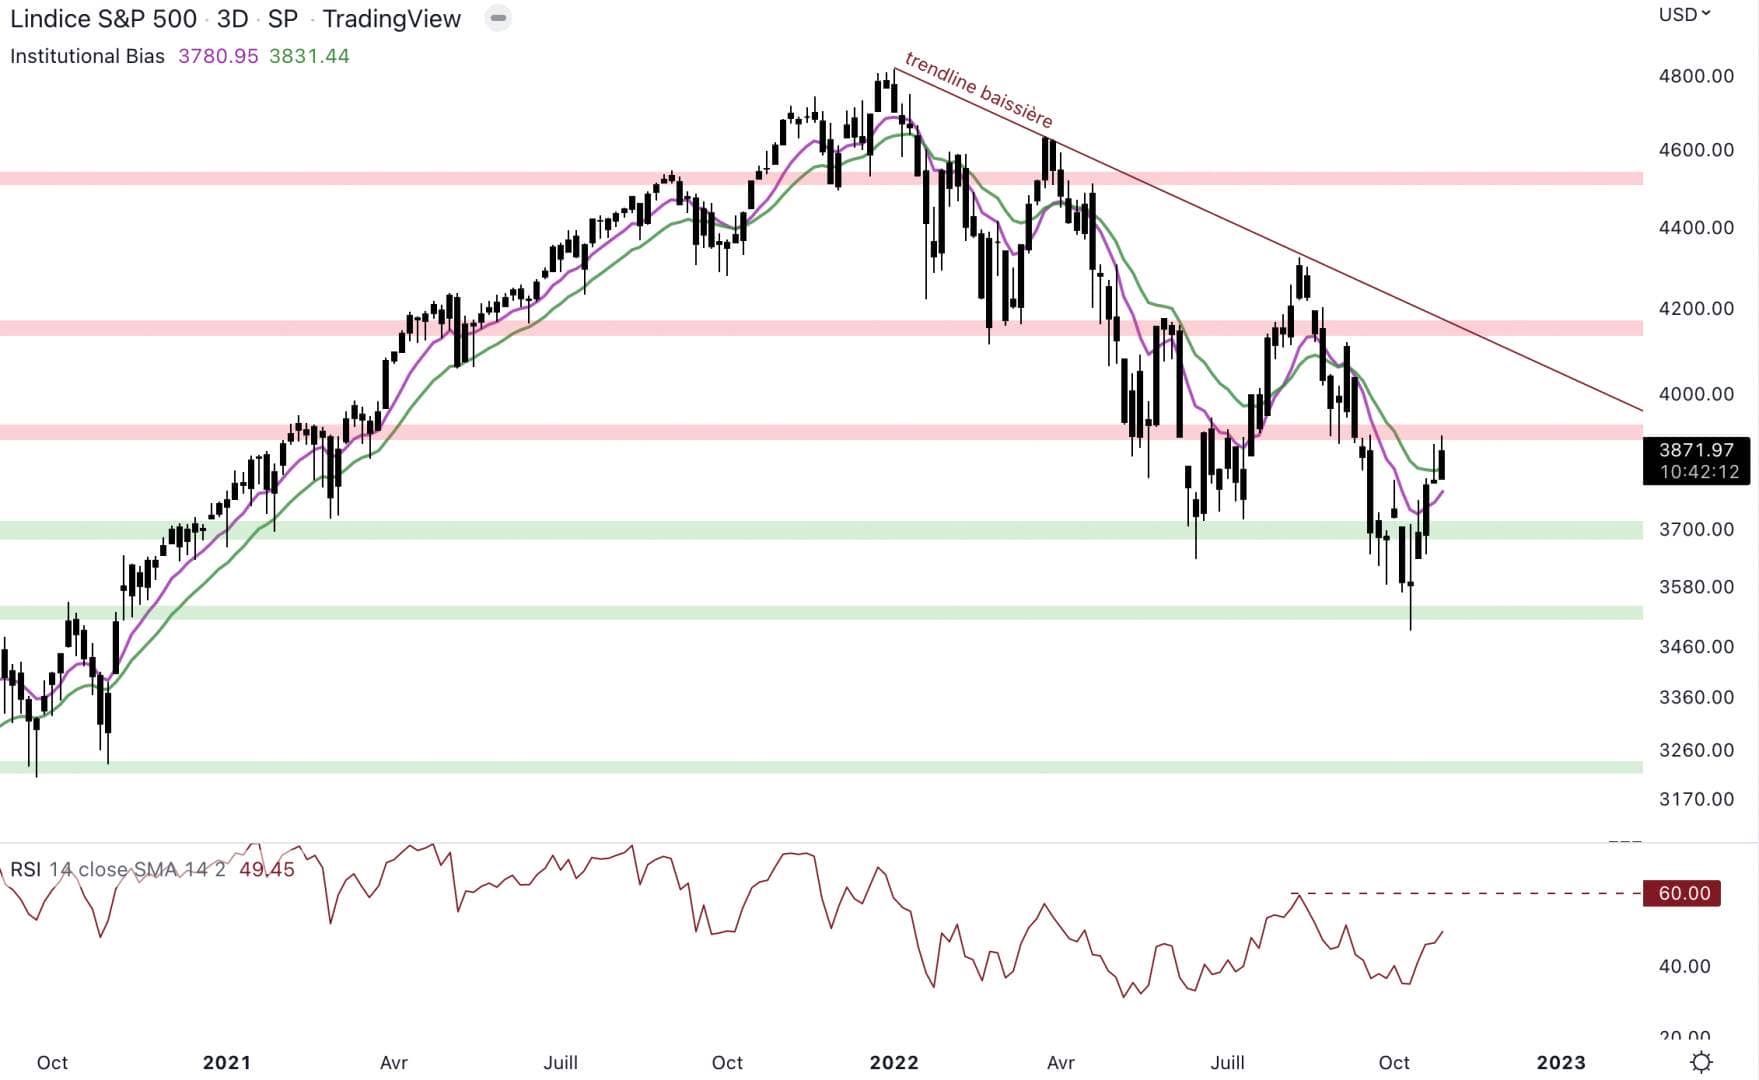 The S&P 500 is at an important resistance level.